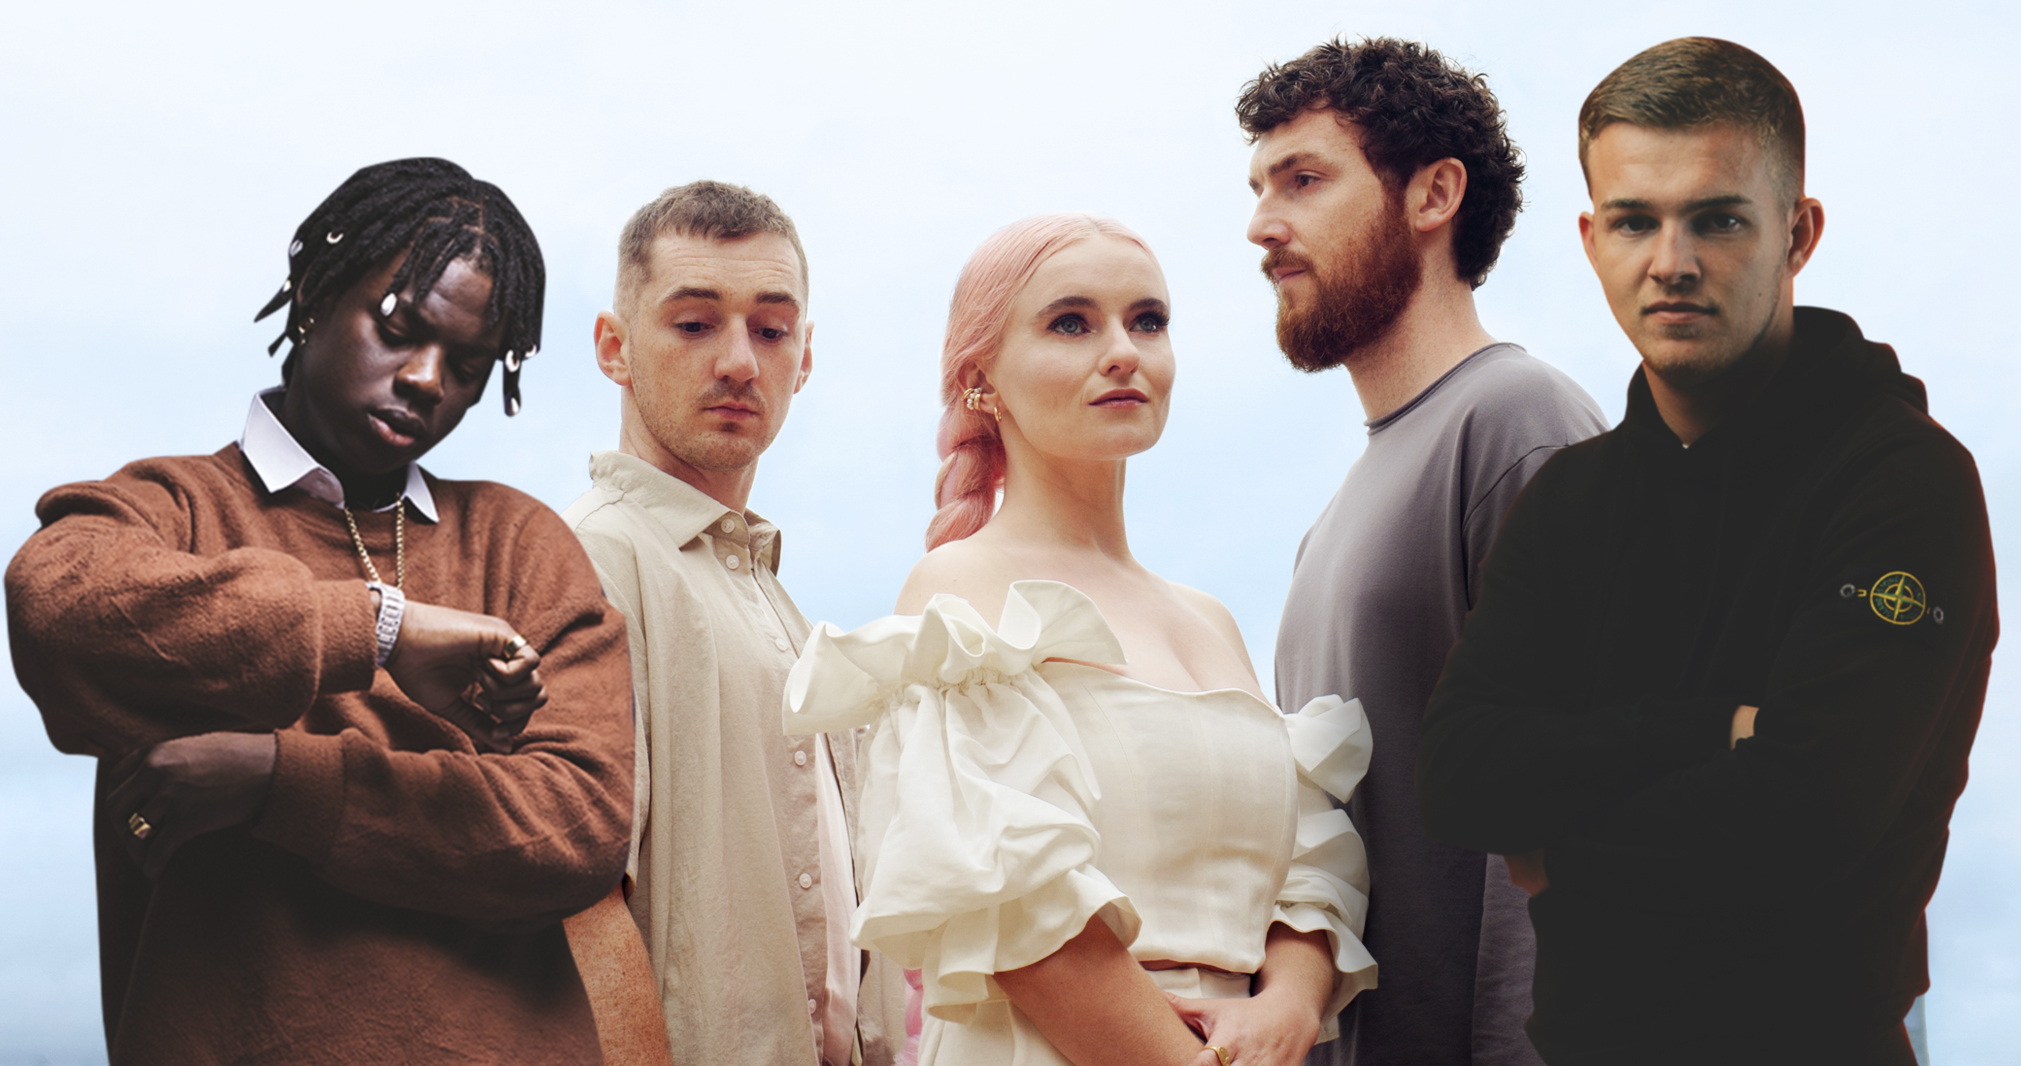 Clean Bandit, French The Kid and Rema team up on Sad Girls: First Listen